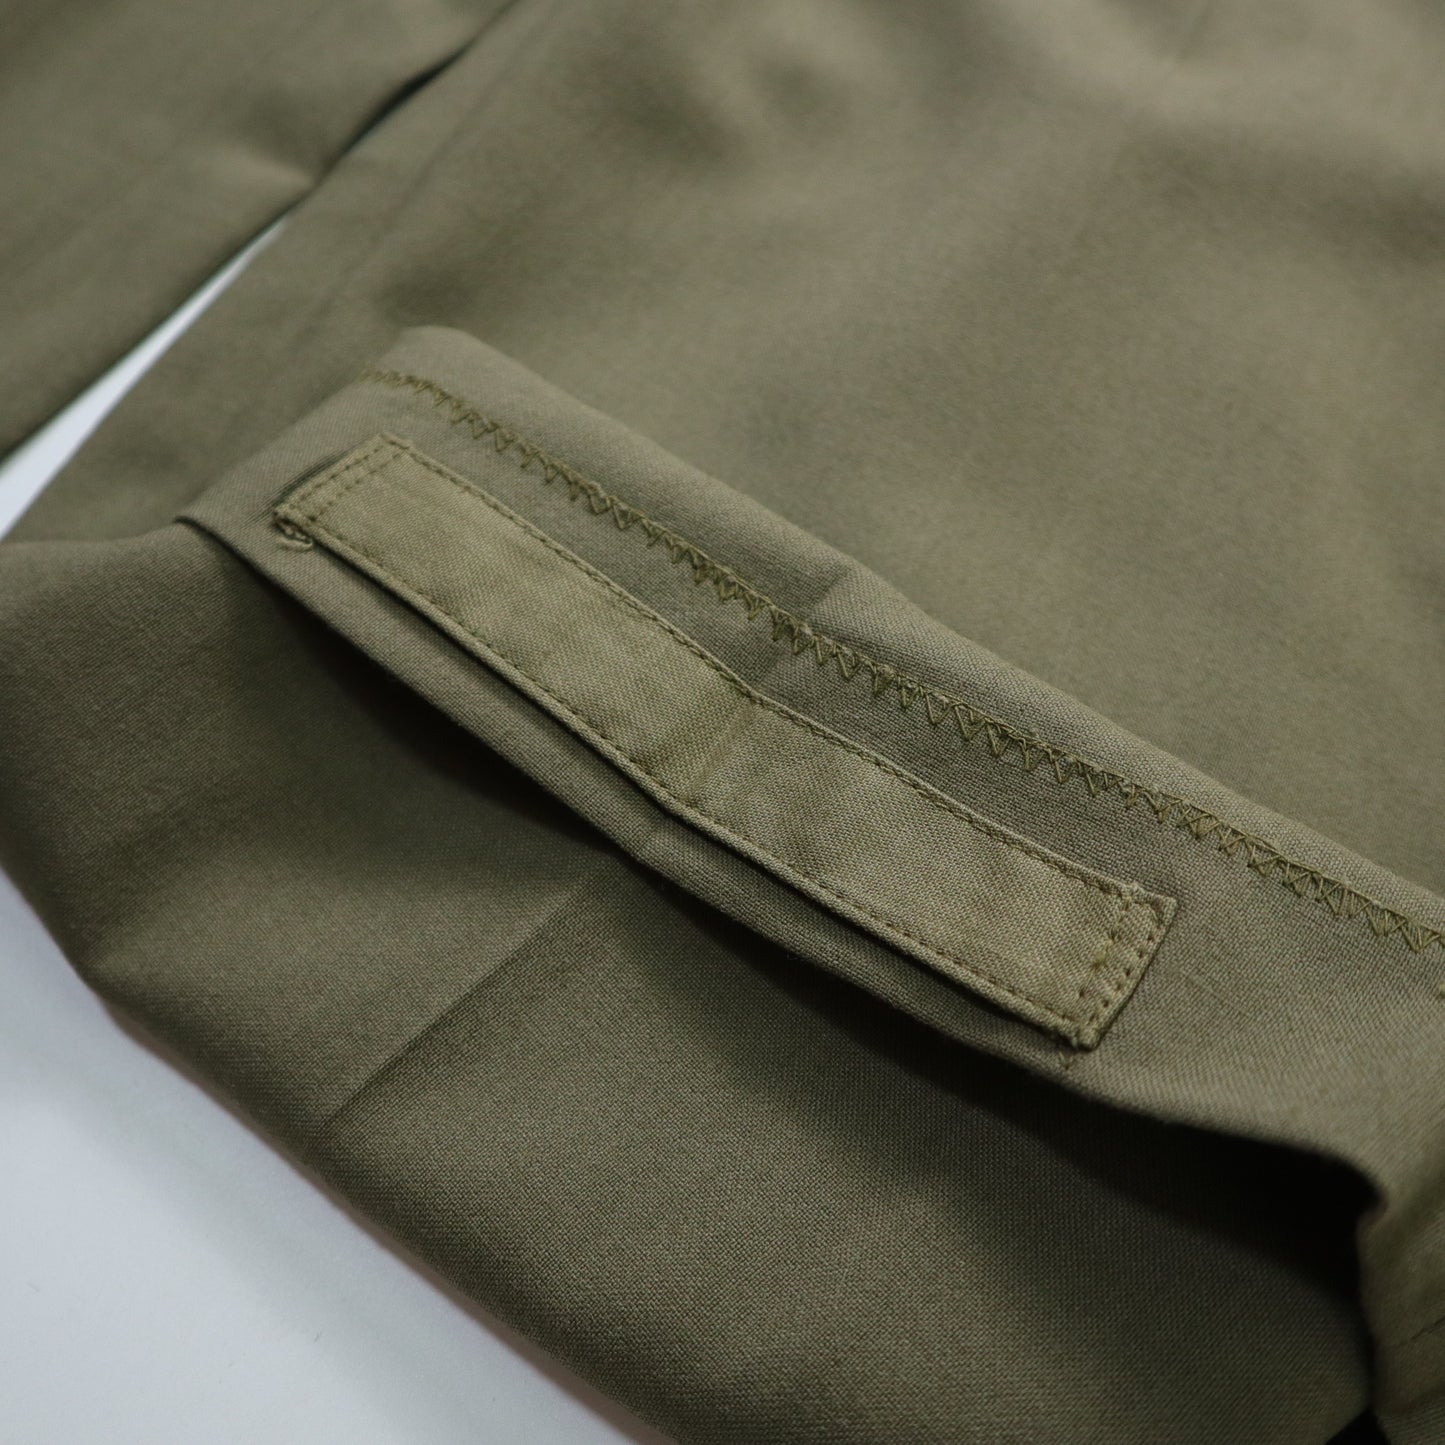 (33W)1955 Canadian Armed Forces Wool Trousers